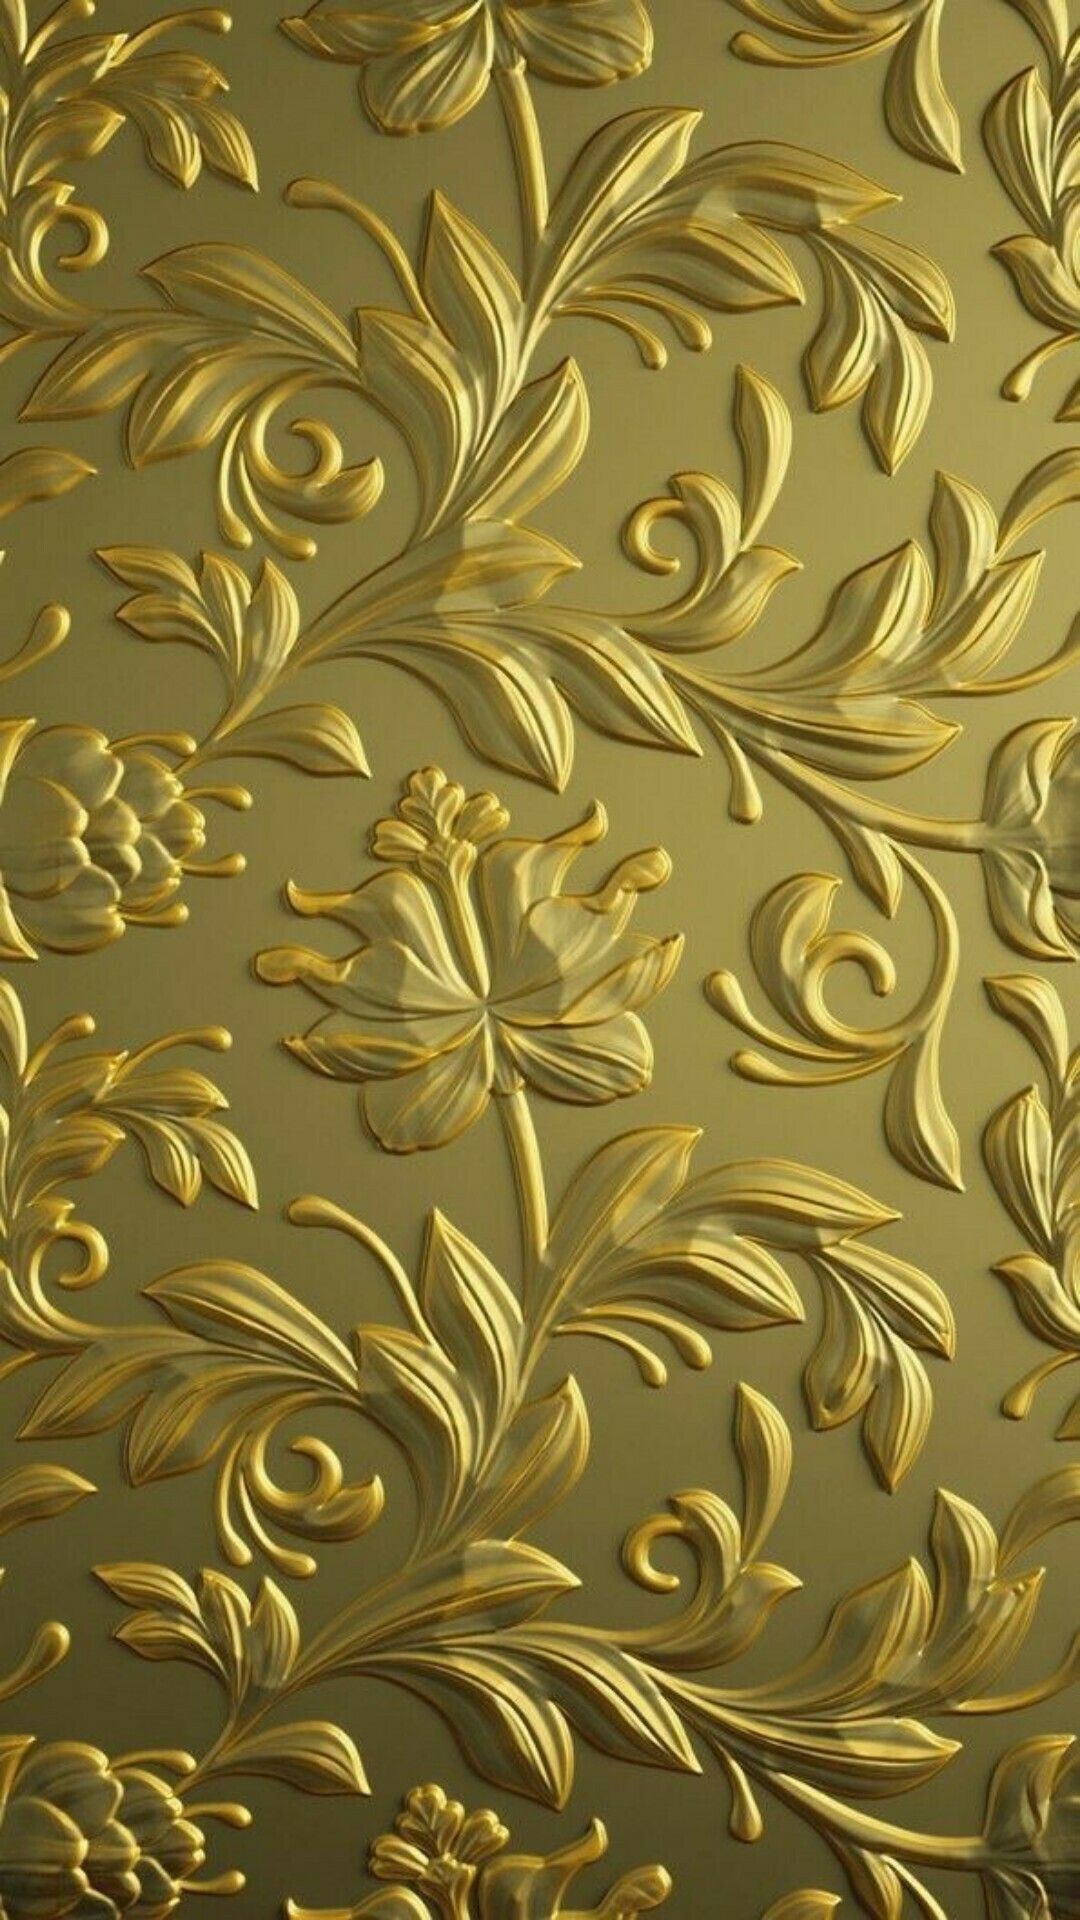 Gold wallpaper with a golden floral design - Gold